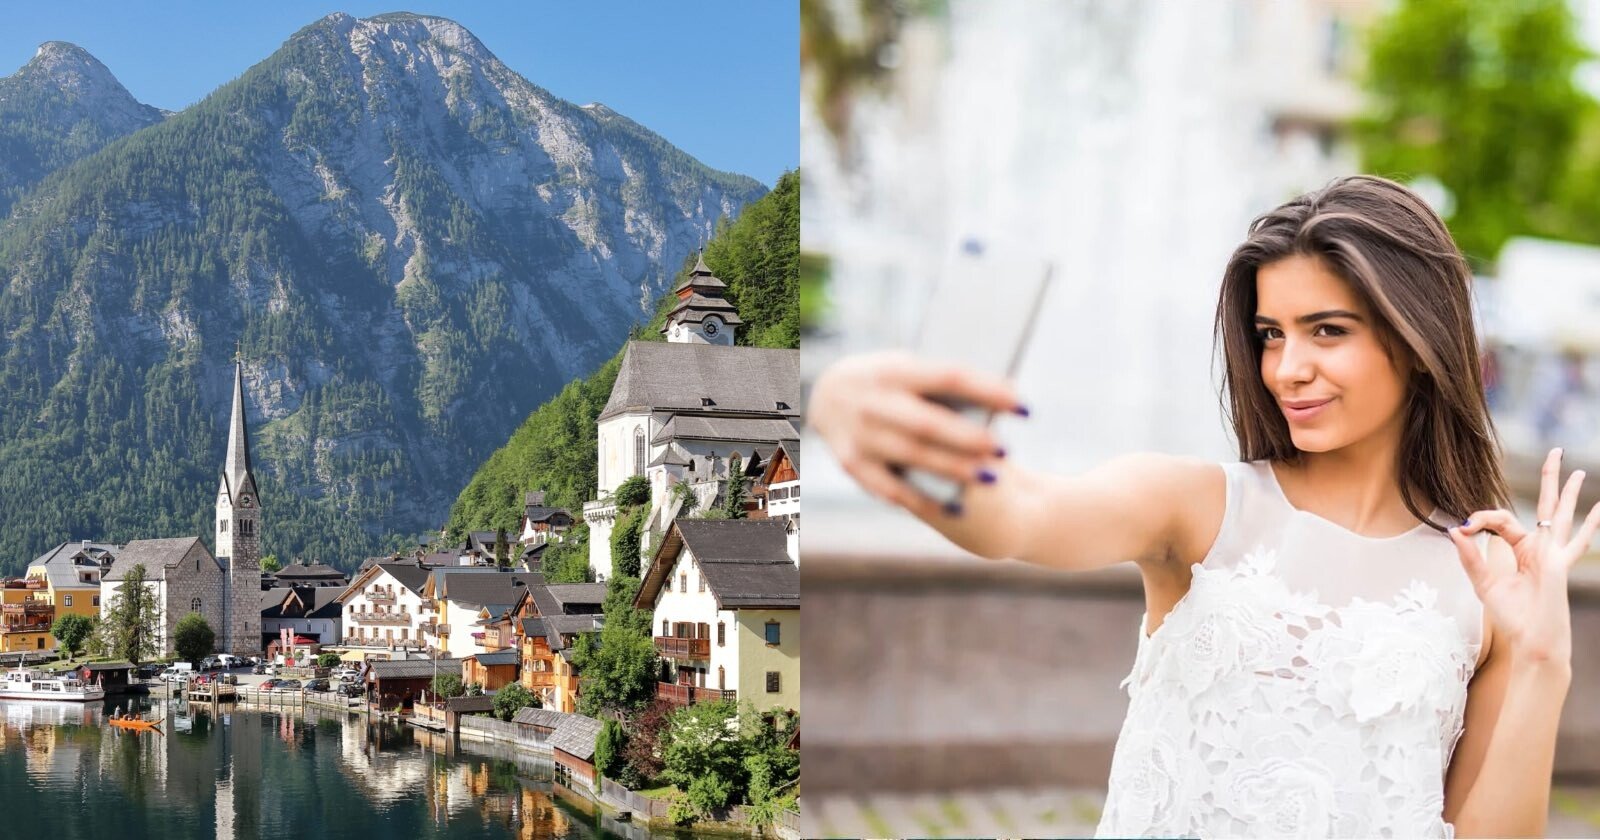 Tourist Town That Inspired Frozen Erects Fence in Bid to Stop Selfies